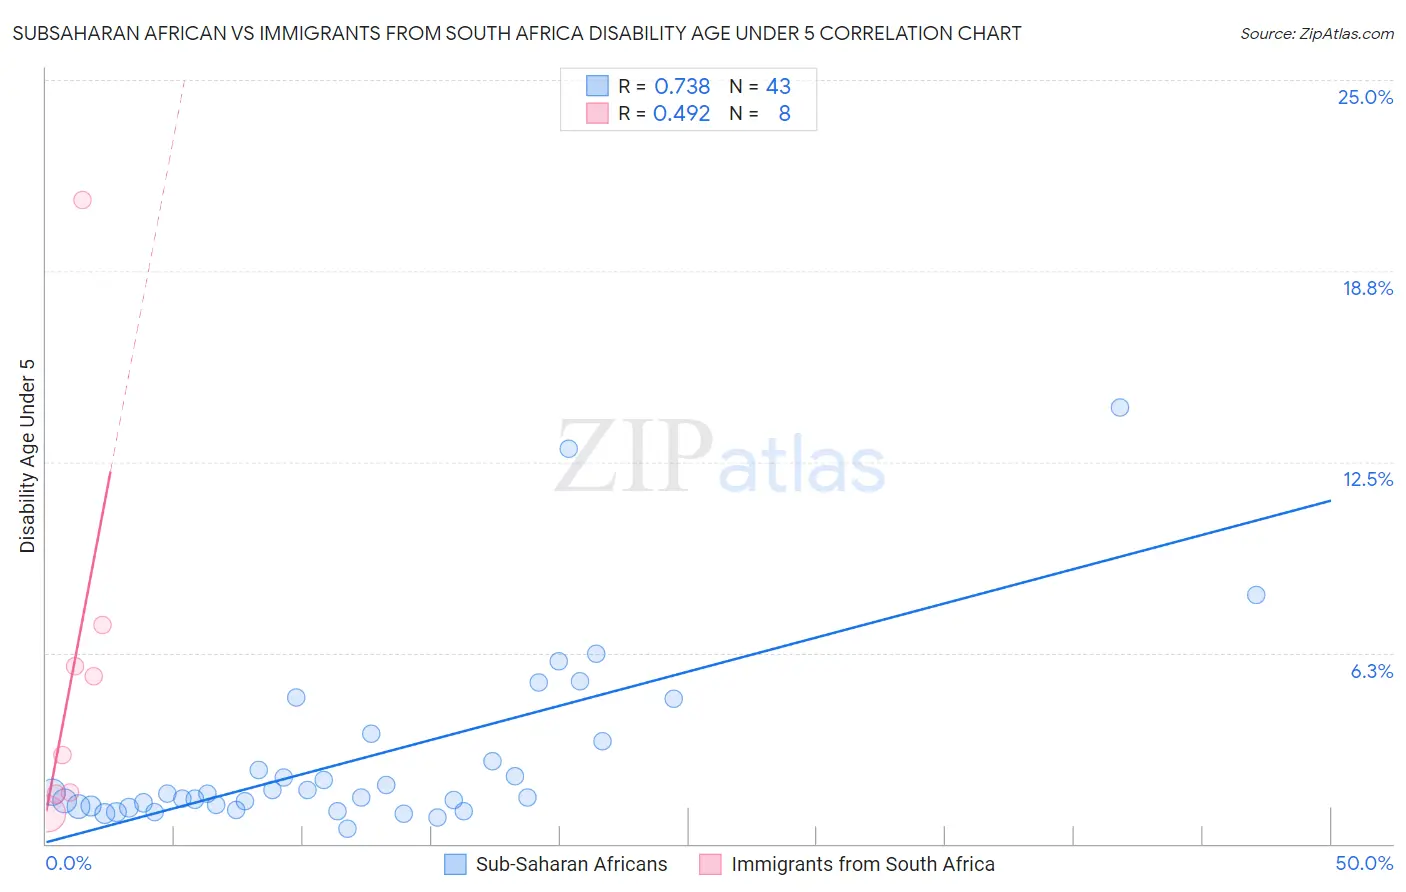 Subsaharan African vs Immigrants from South Africa Disability Age Under 5